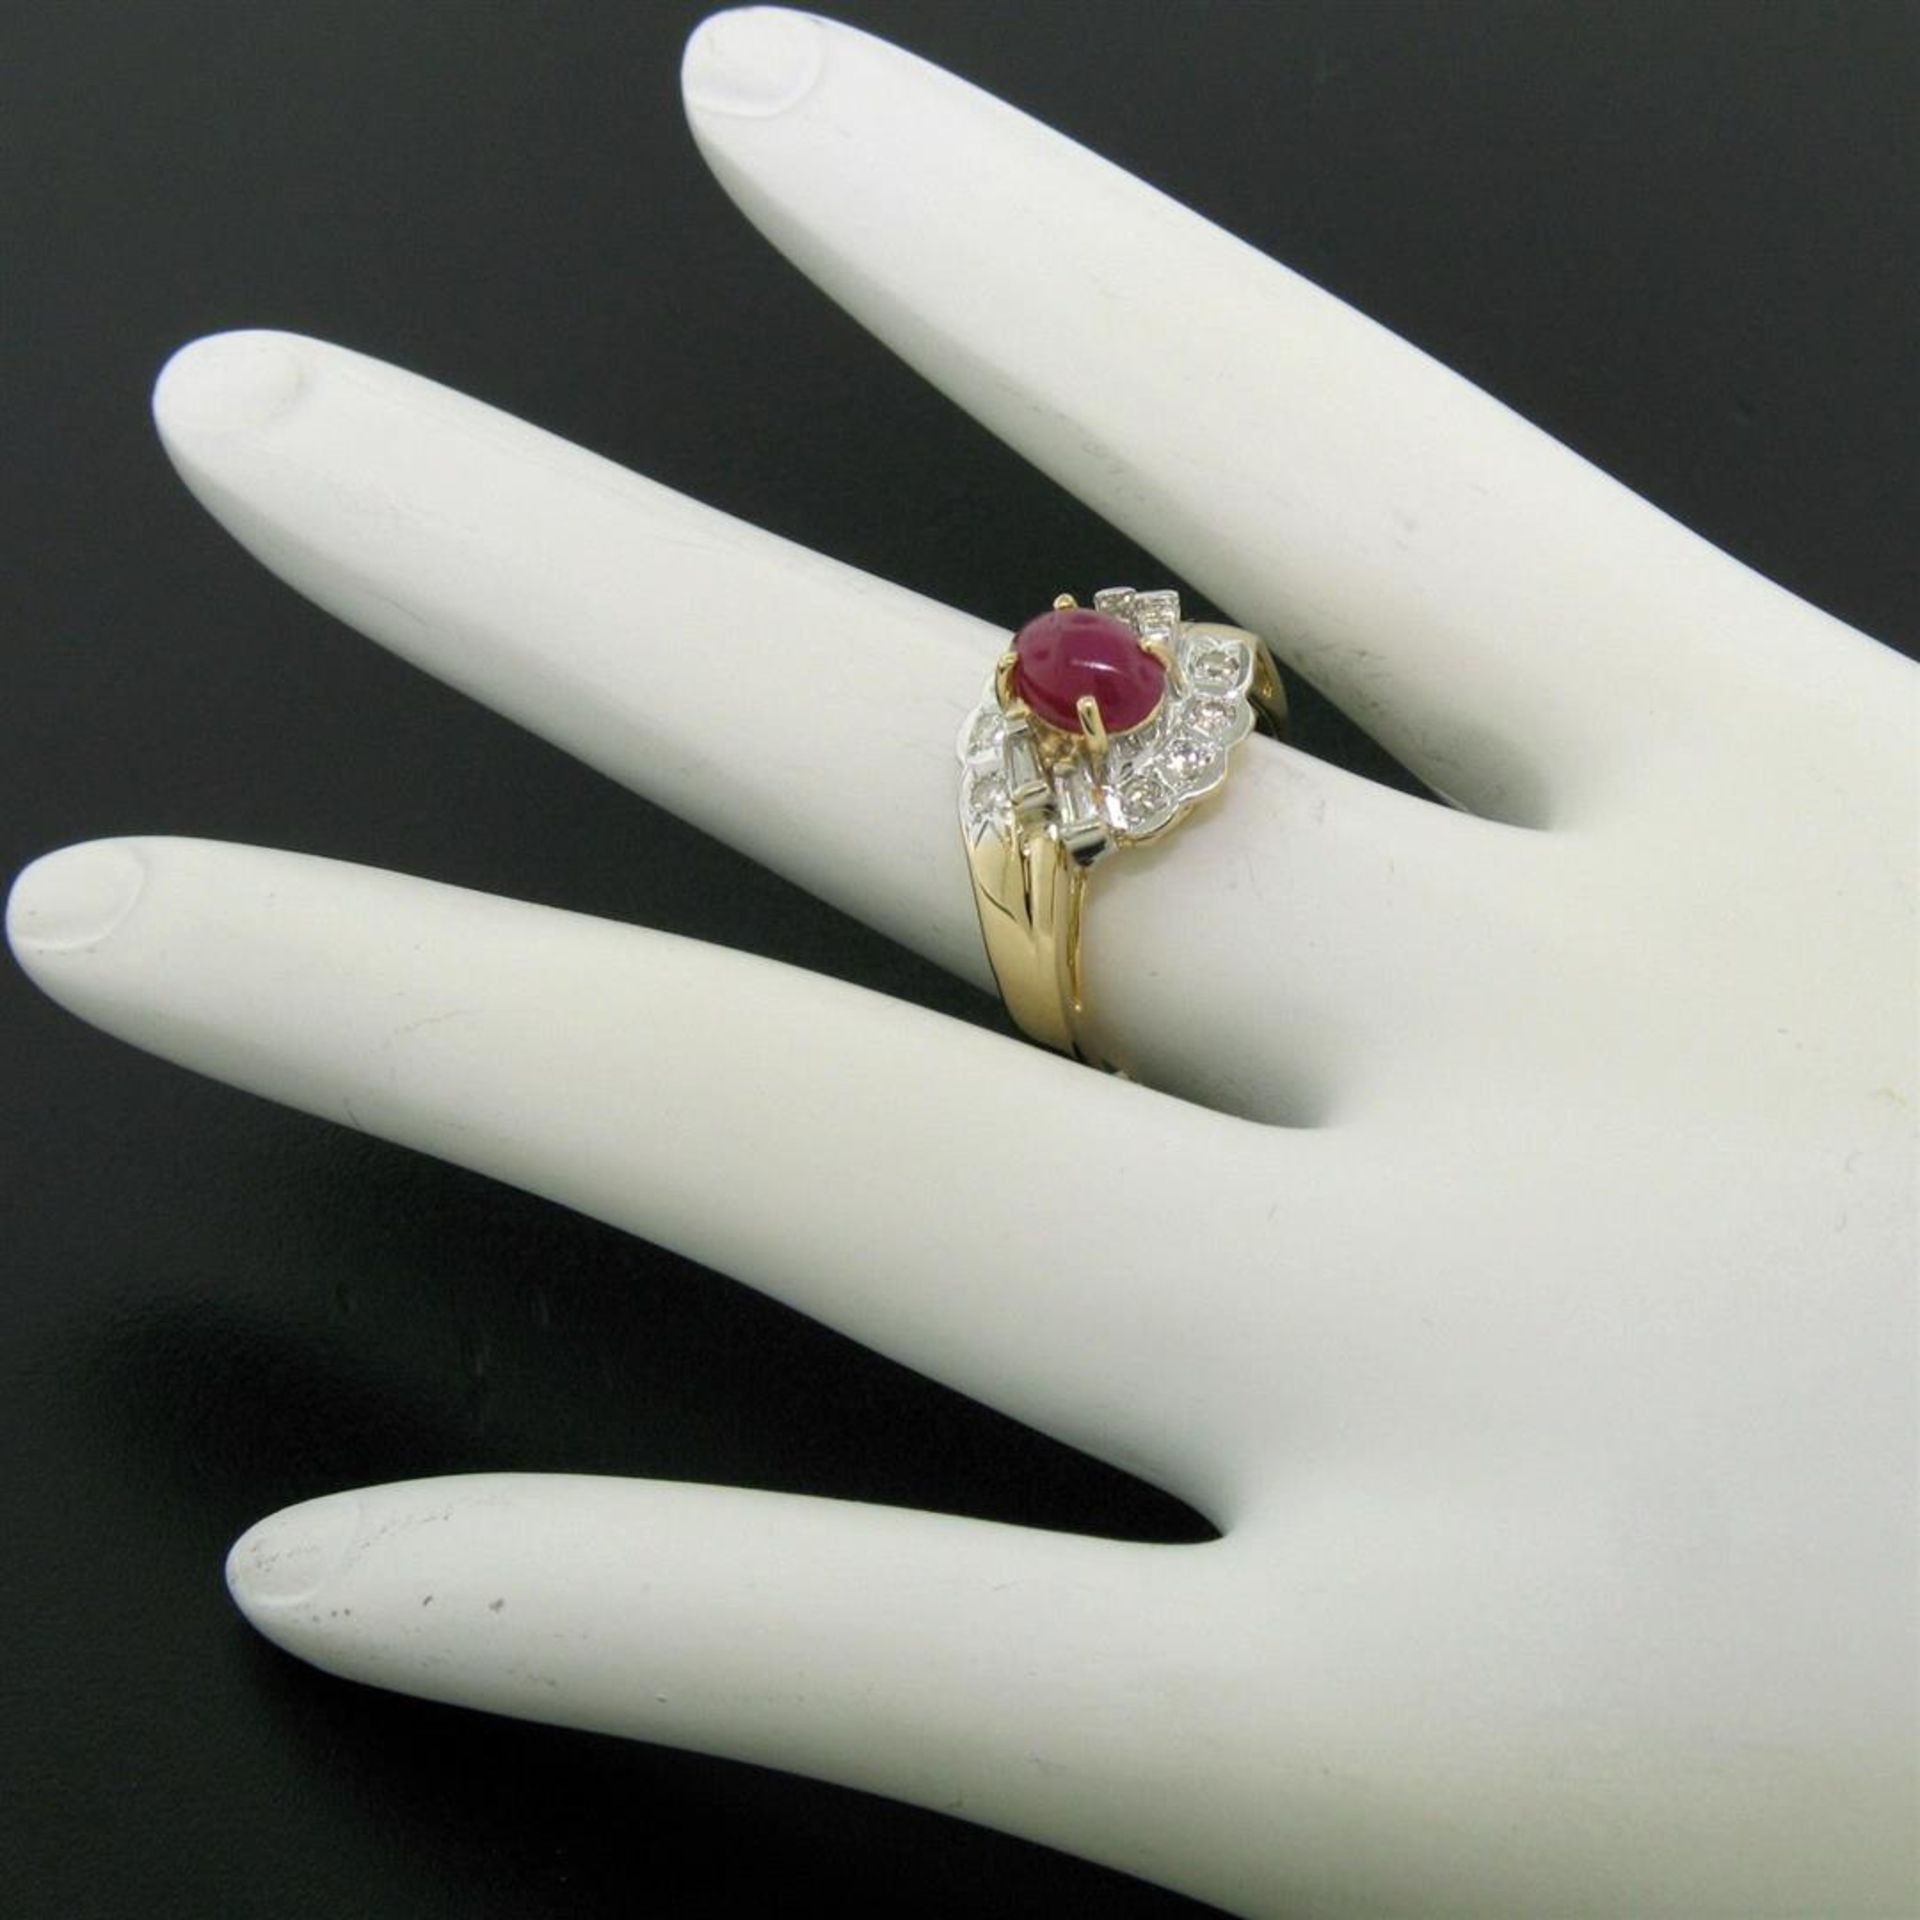 14kt White and Yellow Gold Cabochon Ruby and Diamond Ring - Image 6 of 7